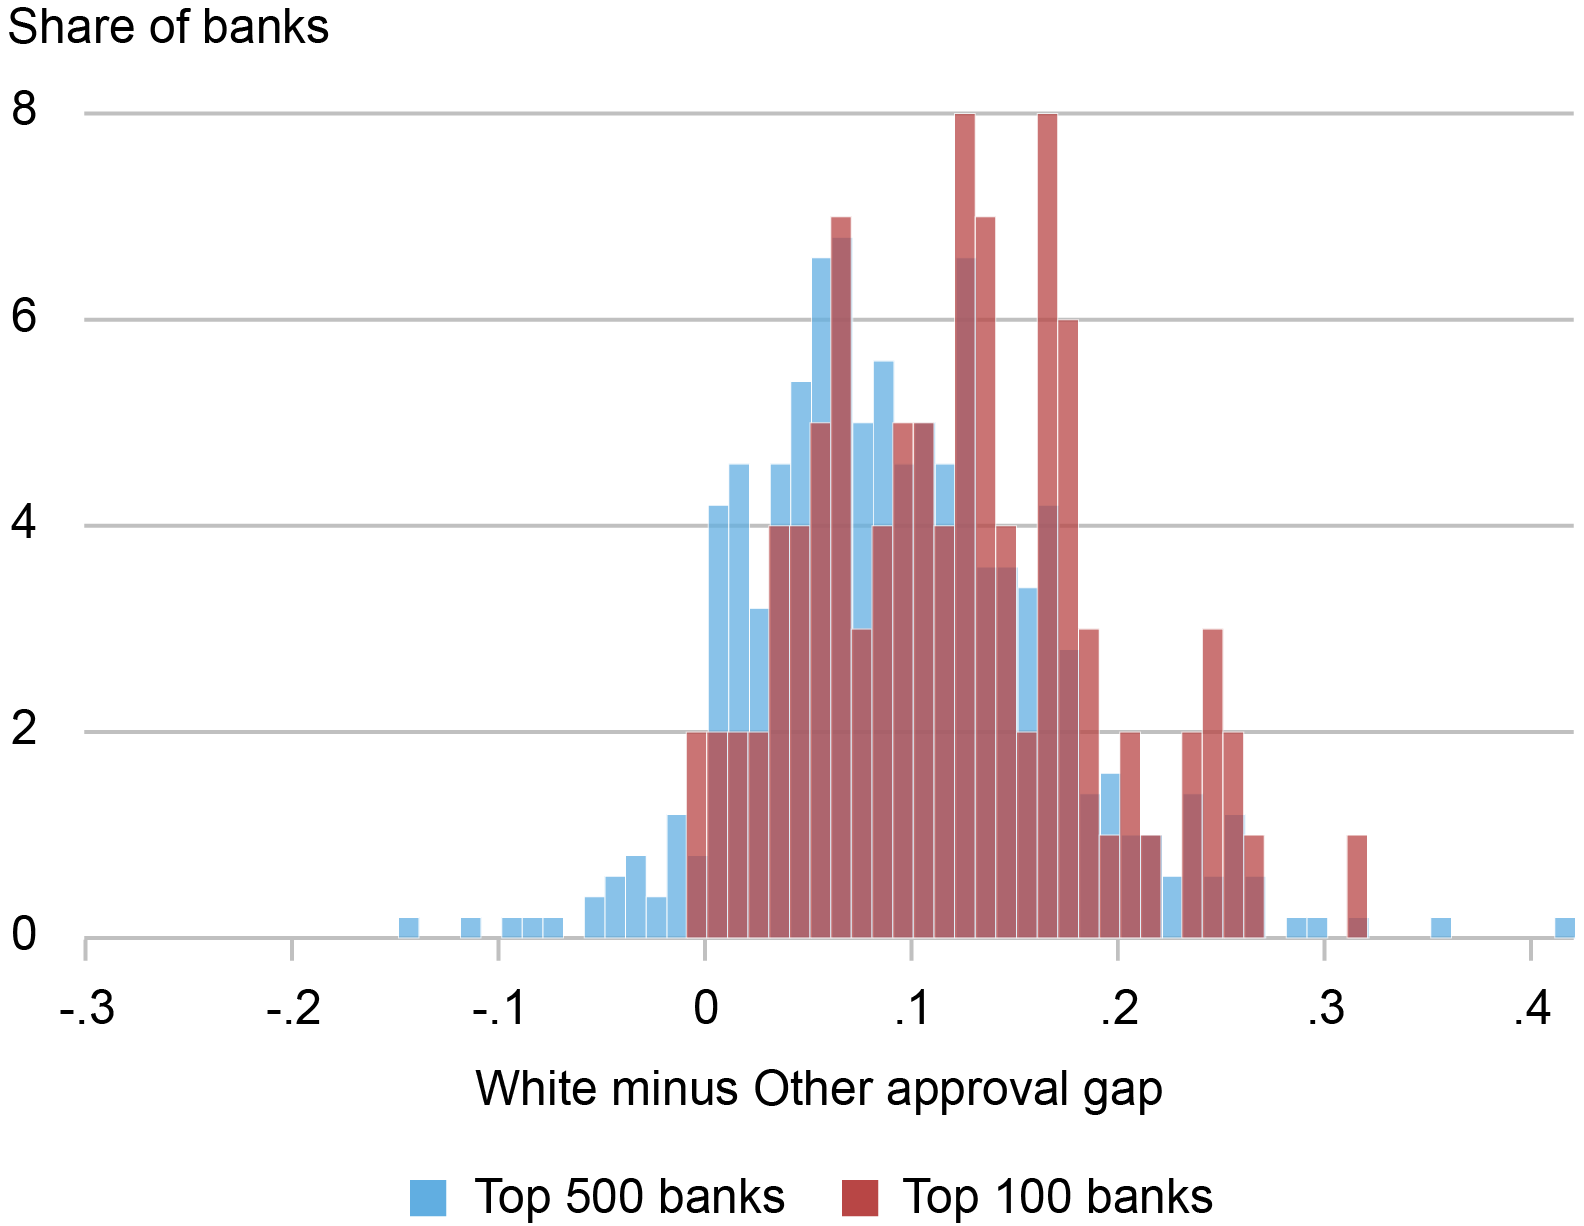 Liberty Street Economics stacked bar chart showing the distribution of approval gaps between white and other applicants at top 100 and top 500 banks by number of applications received. Data are from 1995 to 2019. Most gaps are positive (appearing to the right side of zero on the x-axis) and fall between zero and .3. 